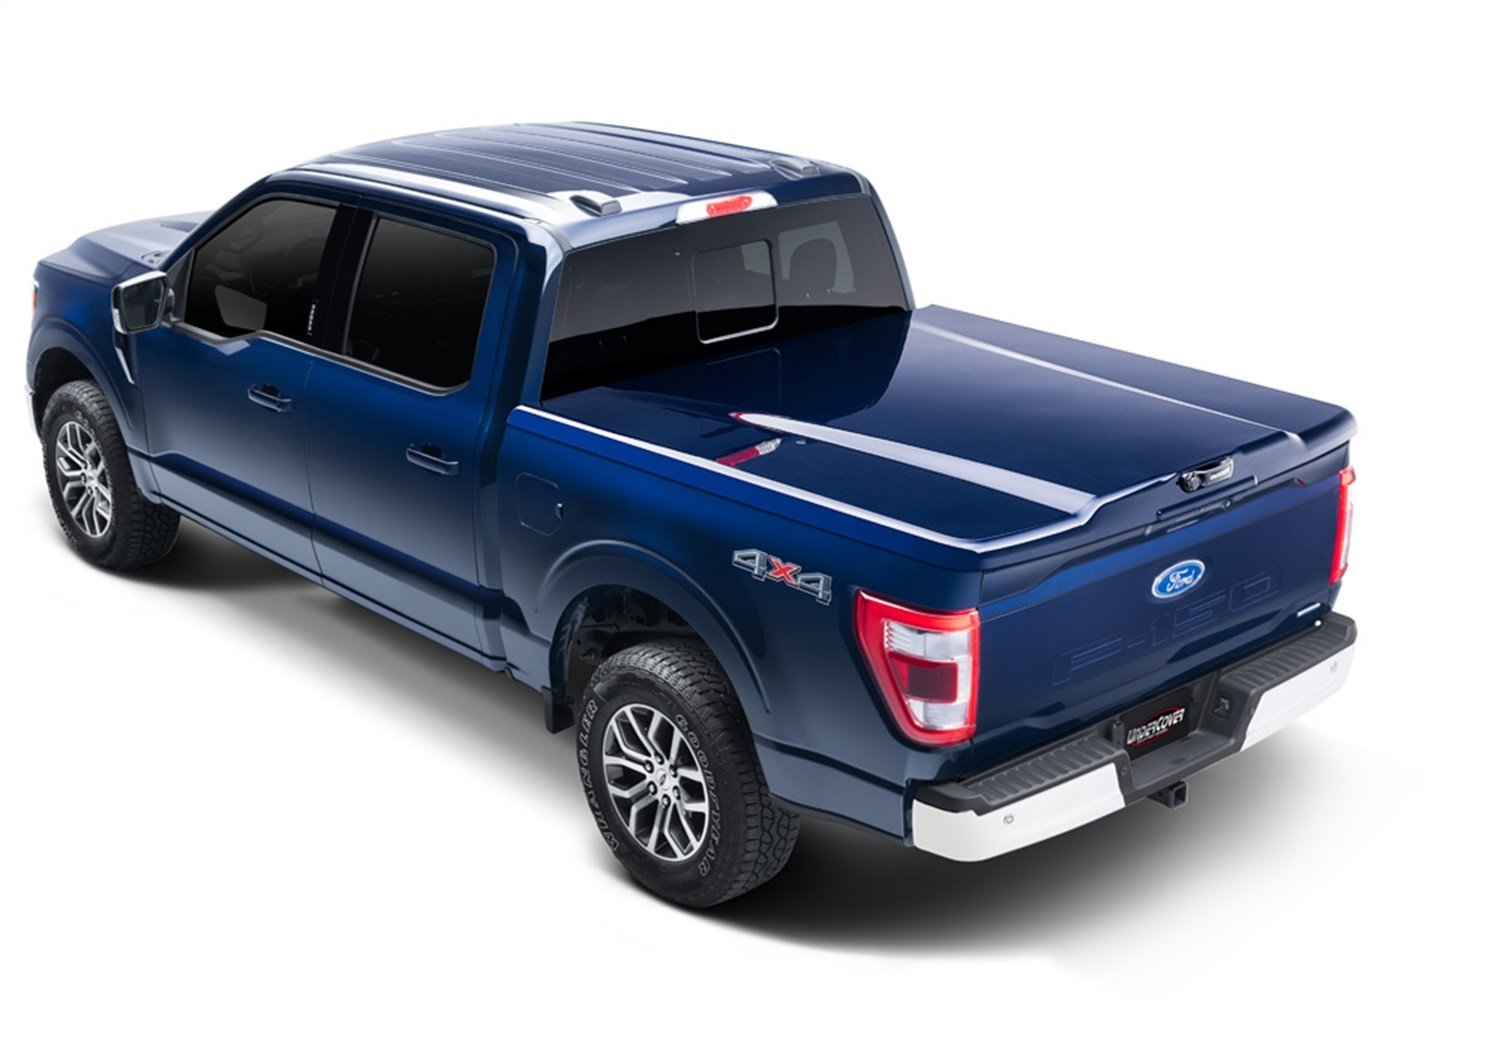 UC2208S Elite Smooth Hard Non-Folding Cover, Fits Select Ford F-150 5'7" Bed Crew (Includes Lightning) Smooth - Ready To Paint